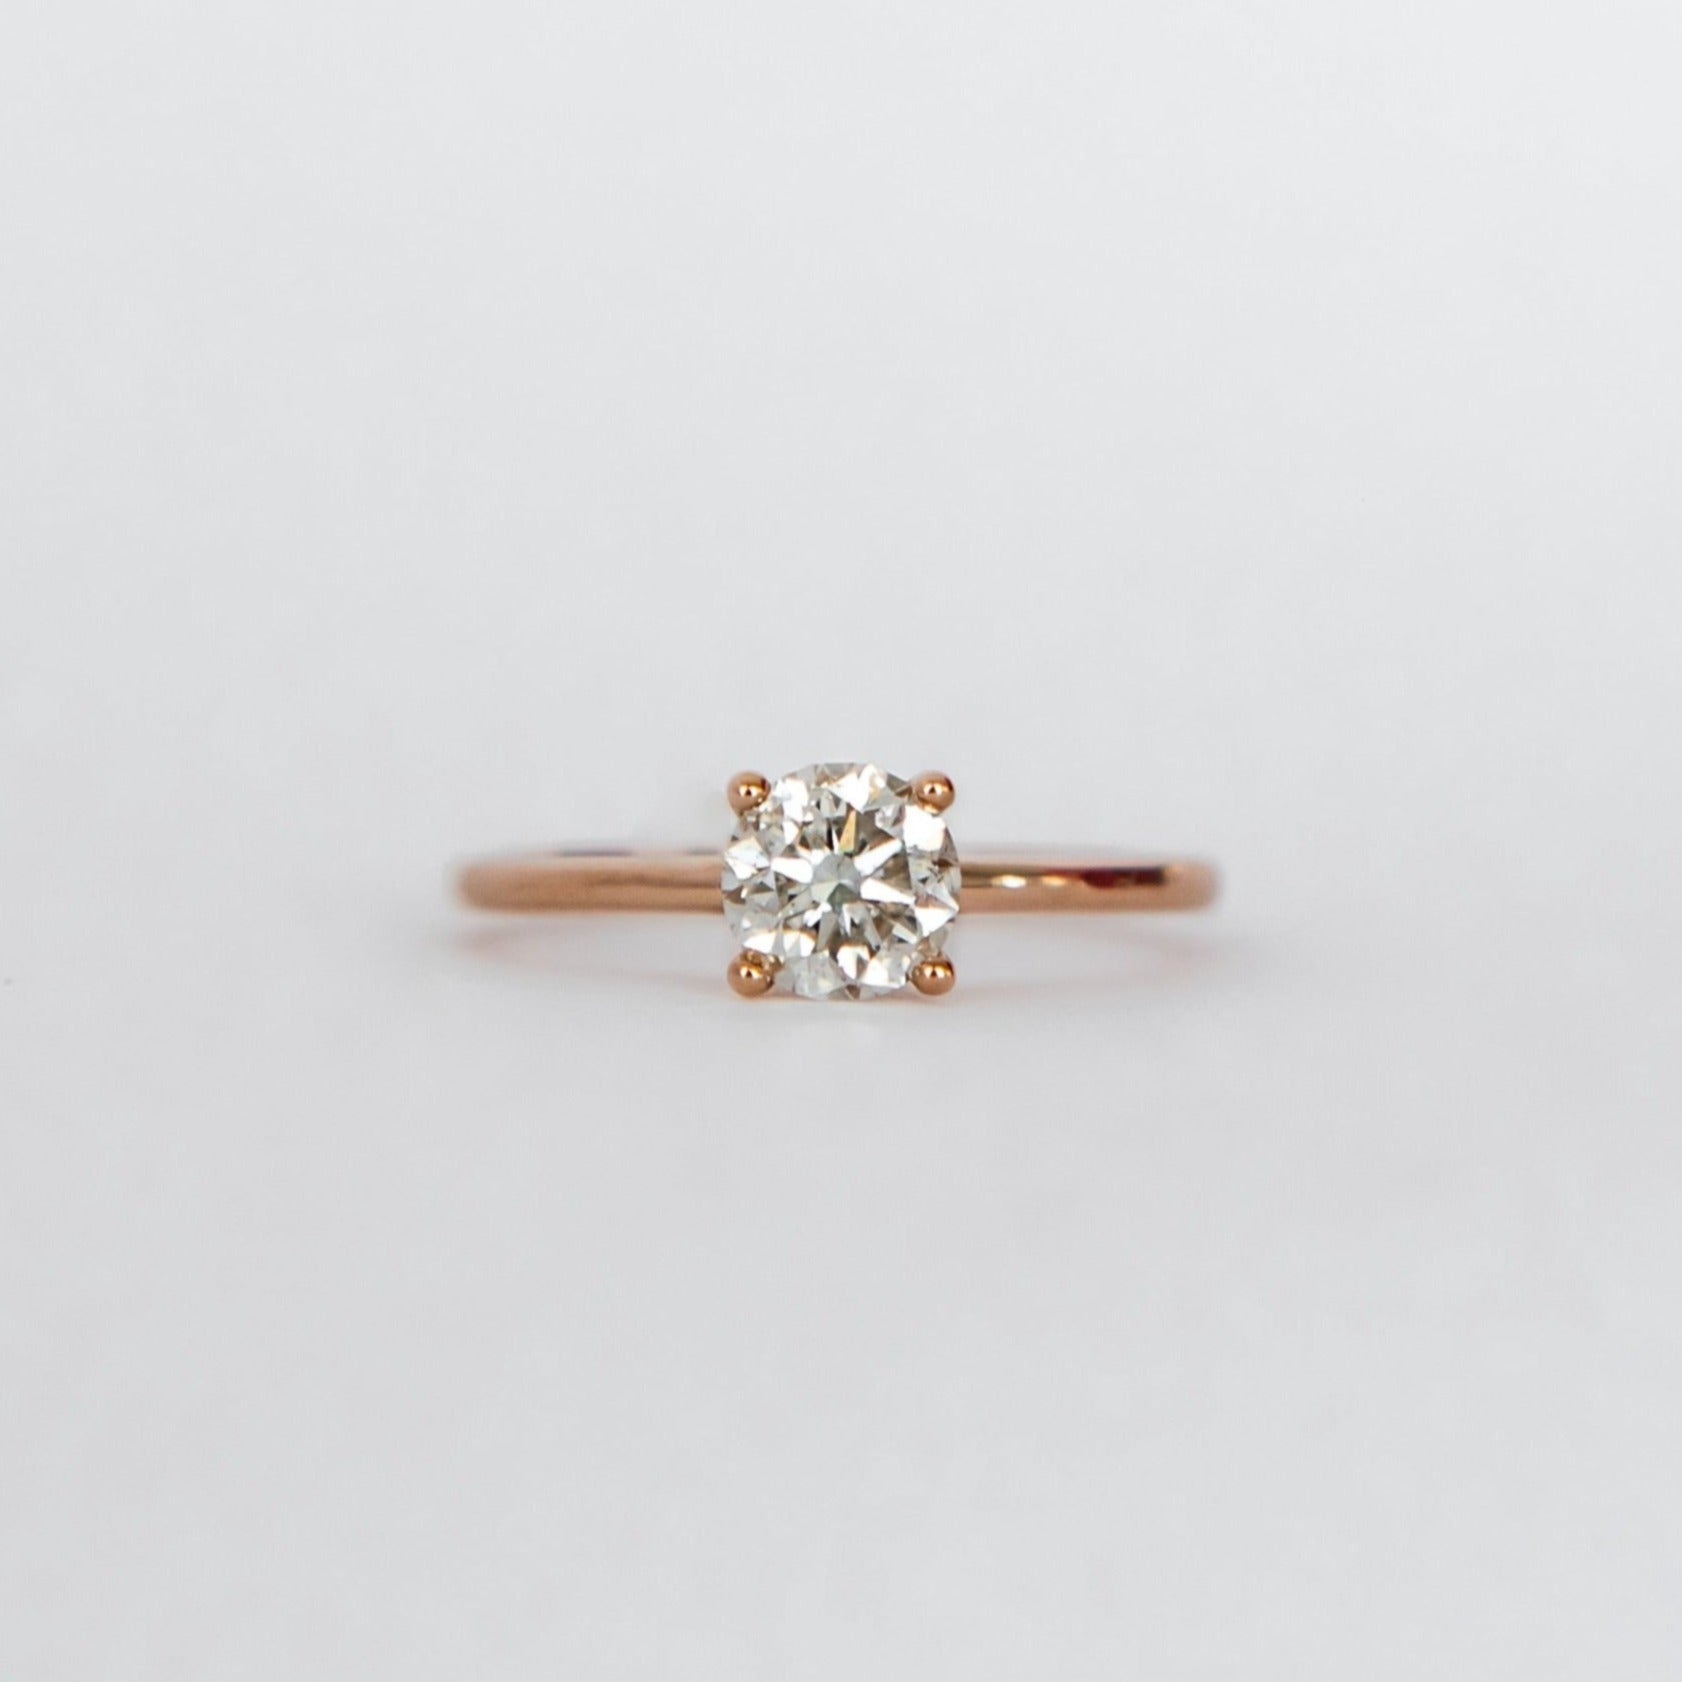 18ct rose gold solitaire ring with round brilliant cut centre stone.